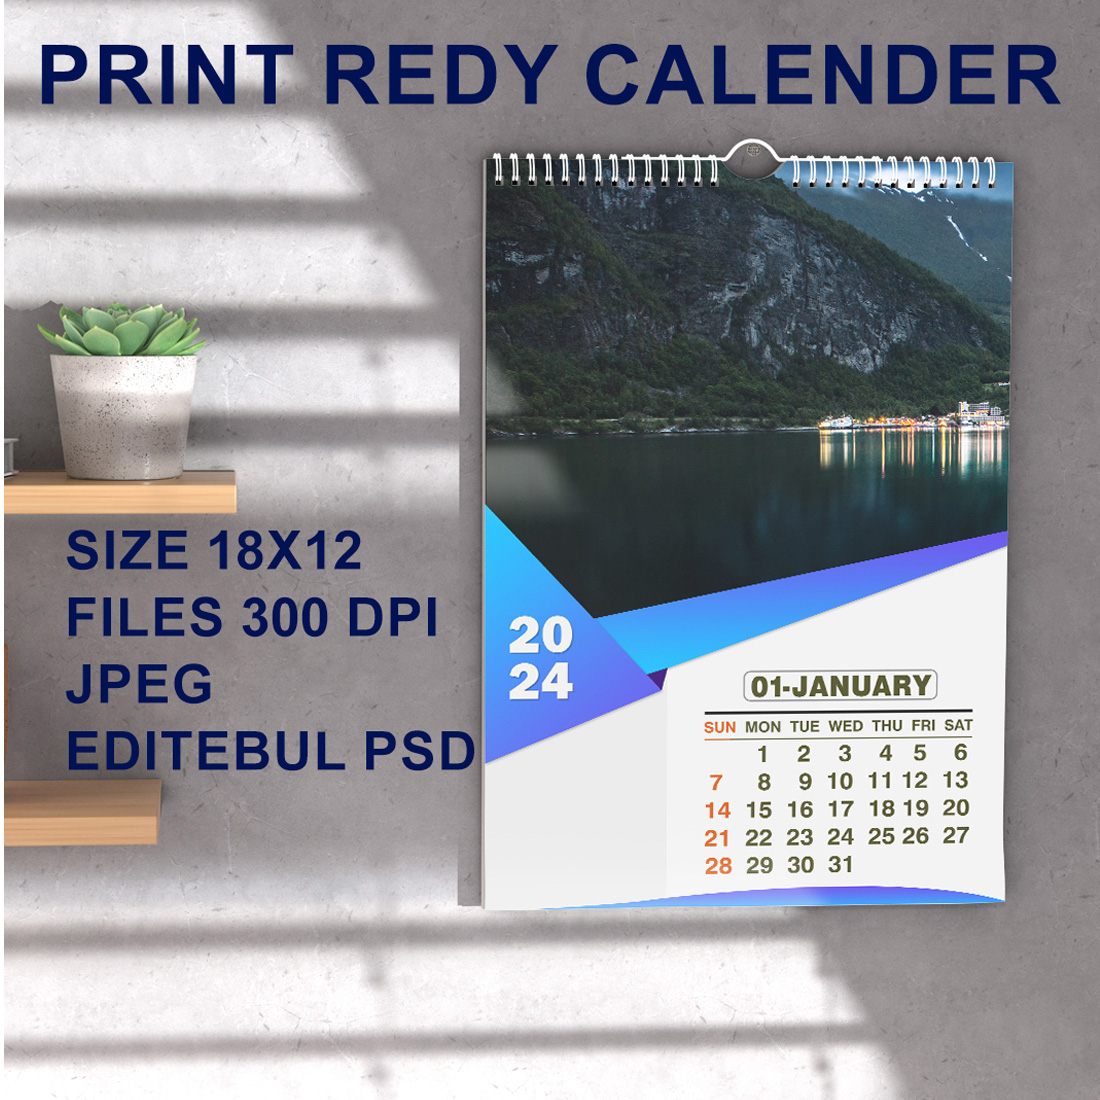 Wall Calendar 2024 Template Design (Ai, EPS, and PDF) - Graphic Reserve